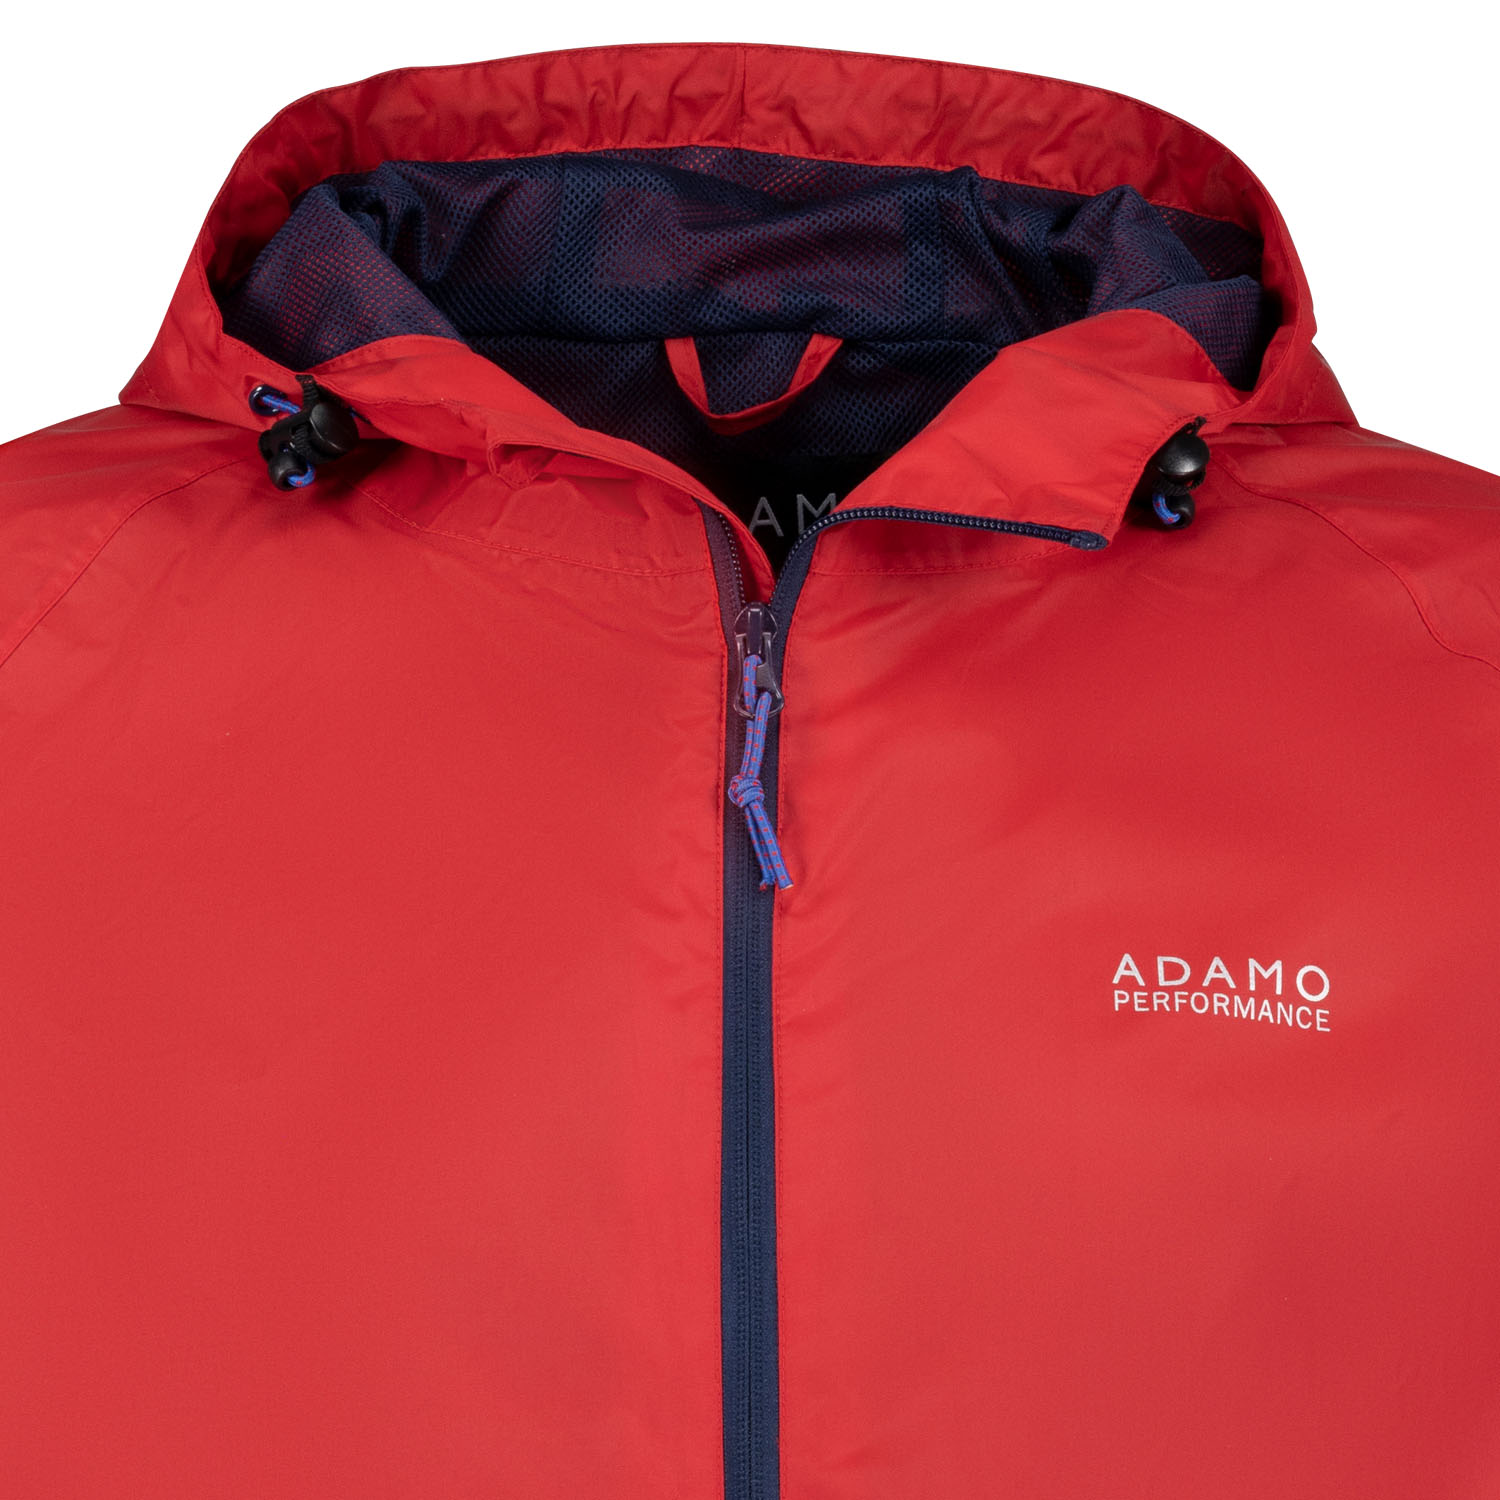 Men's rain jacket red series London by ADAMO in oversizes up to 12XL